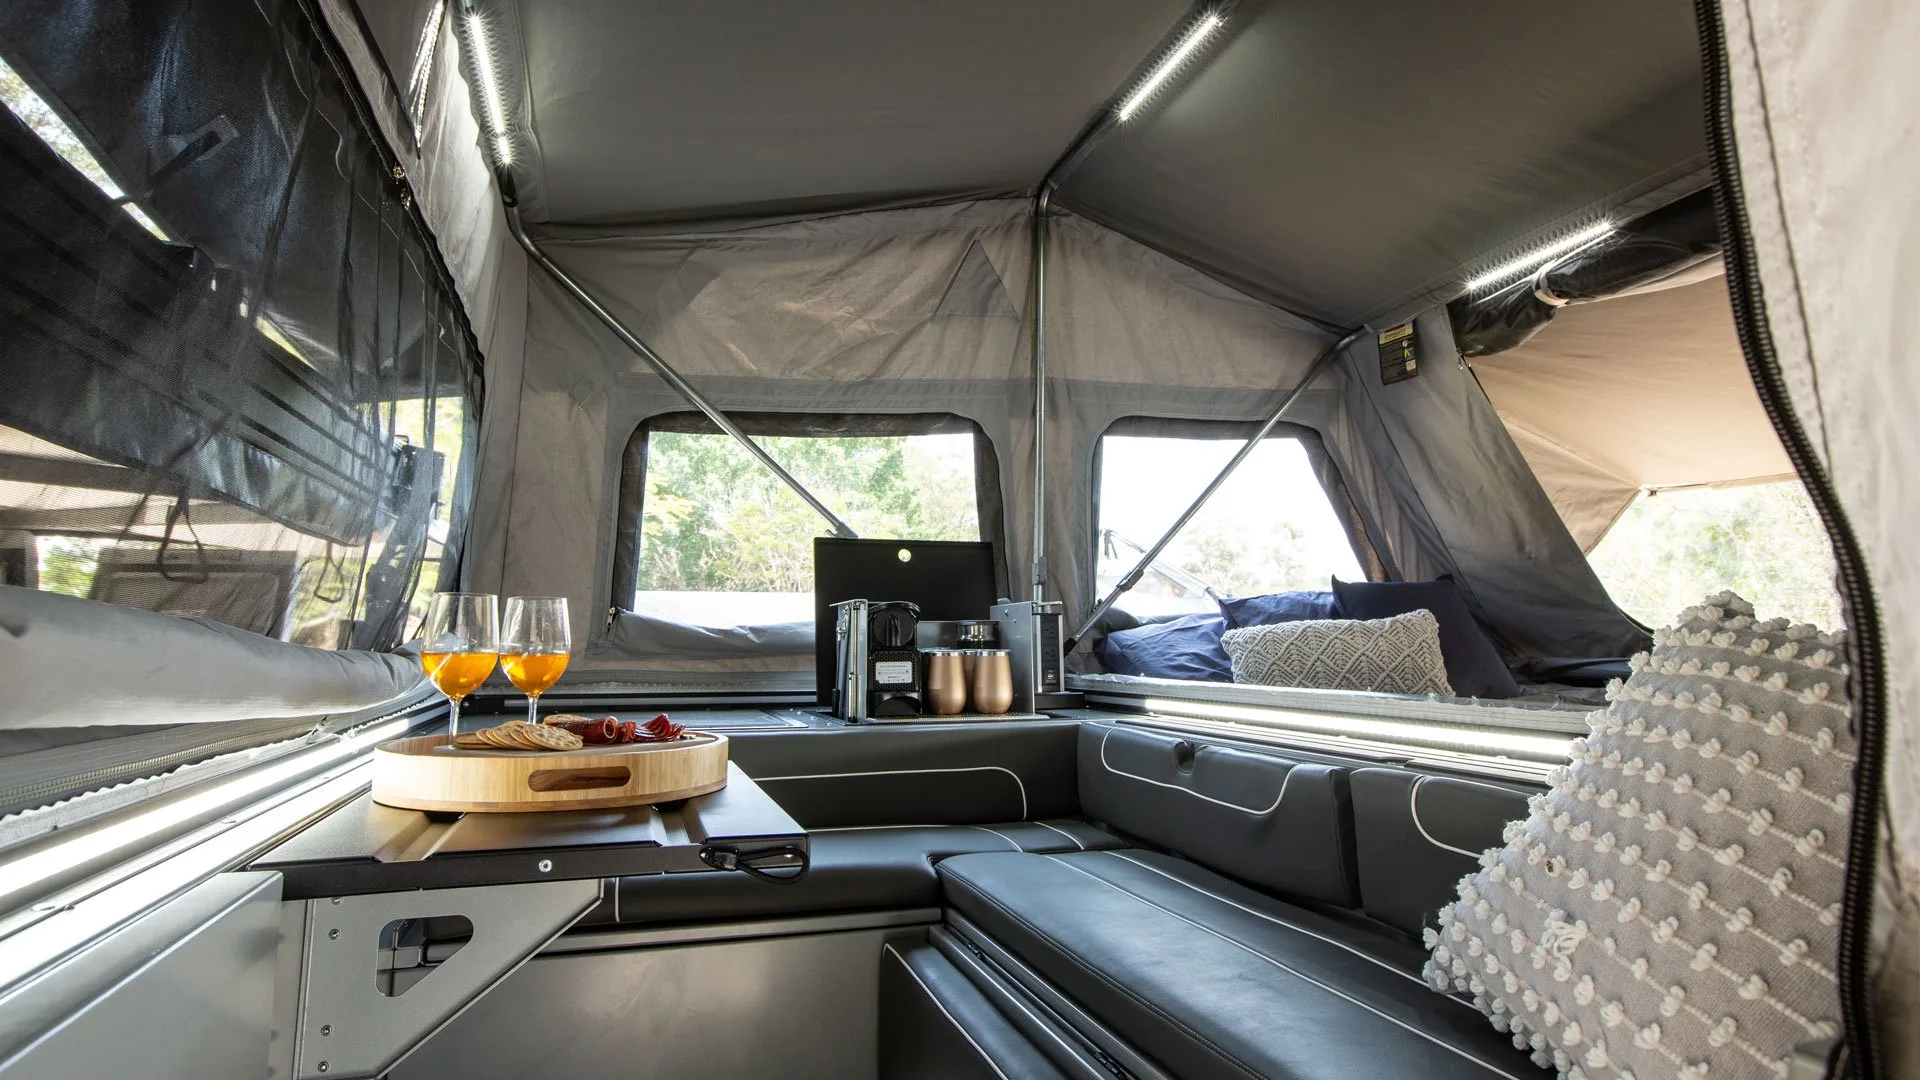 Interior show of Patriot camper from company website